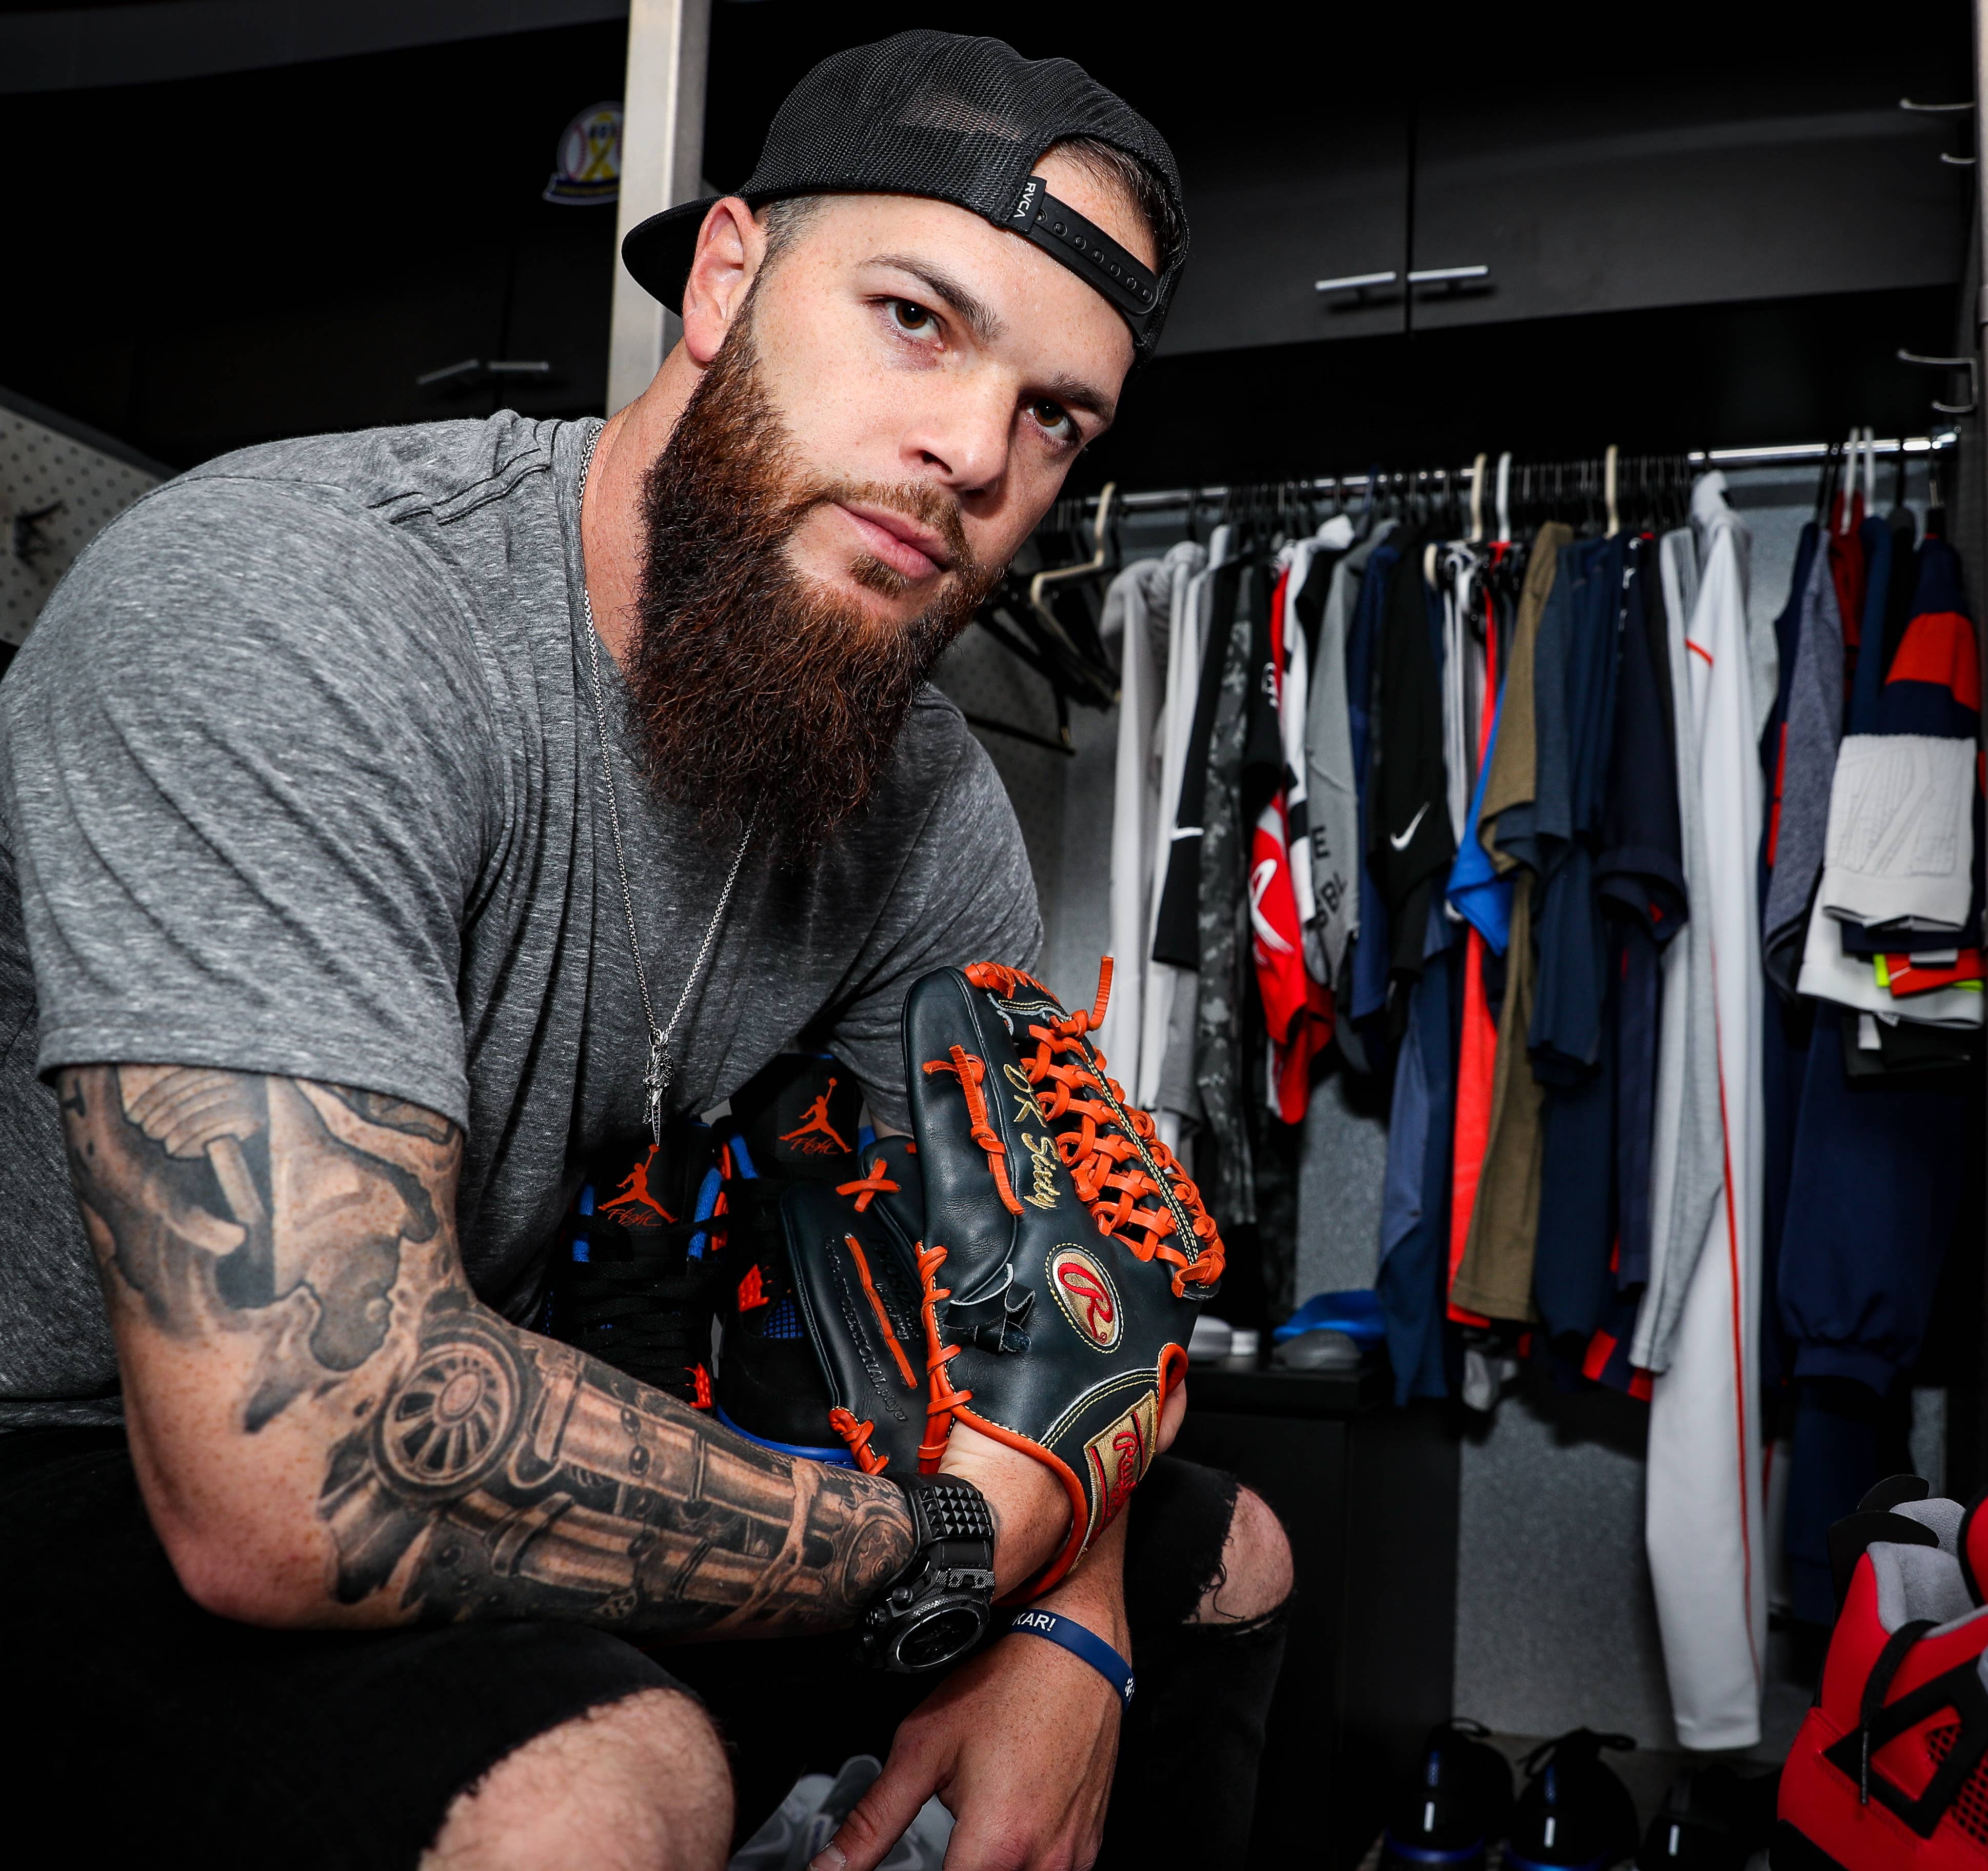 How Dallas Keuchel Collabed With Tattoo Legend Mister Cartoon to